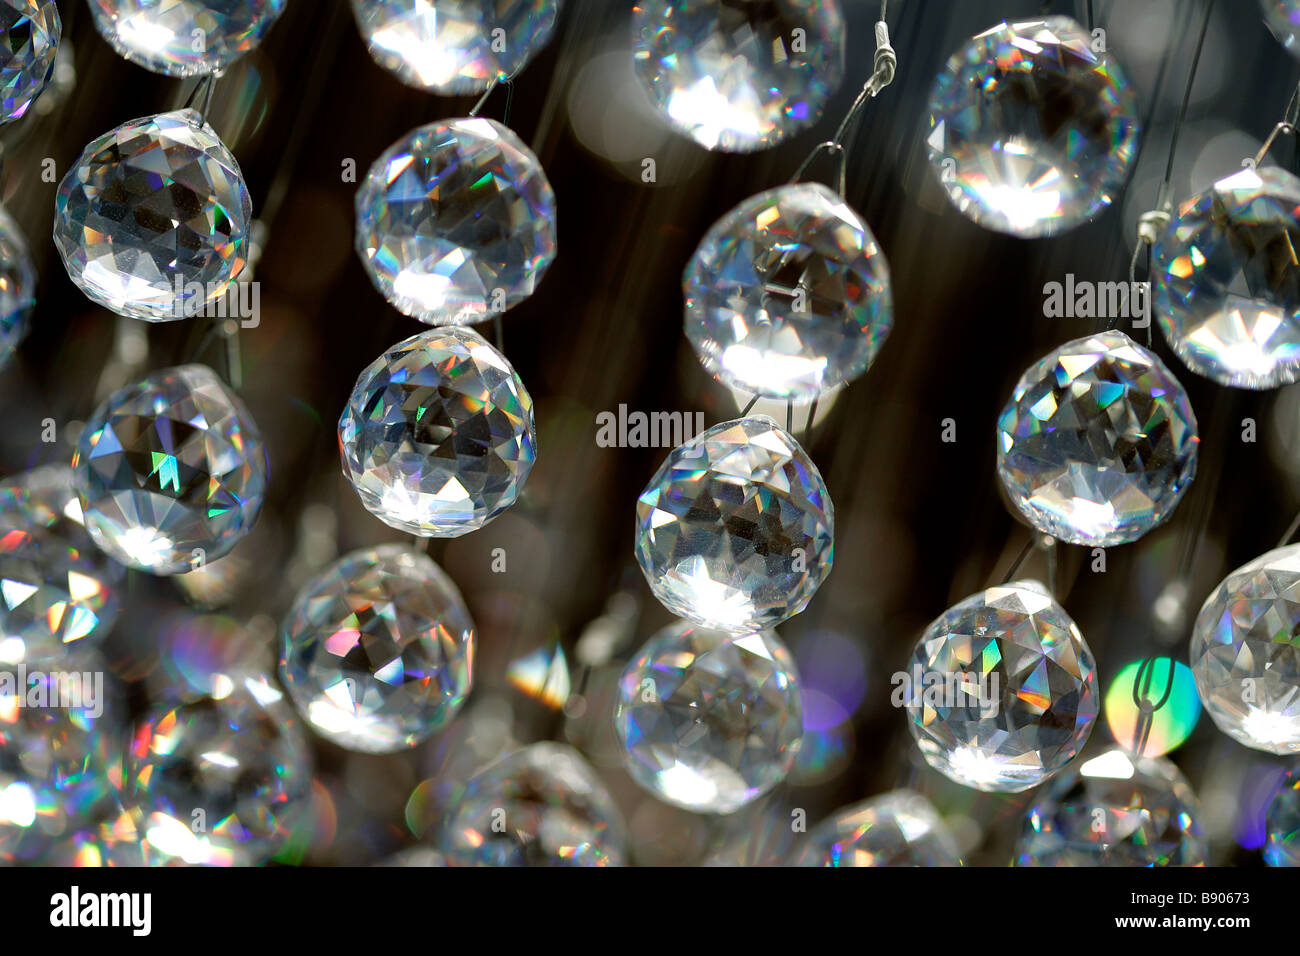 ceiling chandelier crystal glass baubles light illuminate illumination sparkle shiny glass crystal texture background tiered Stock Photo